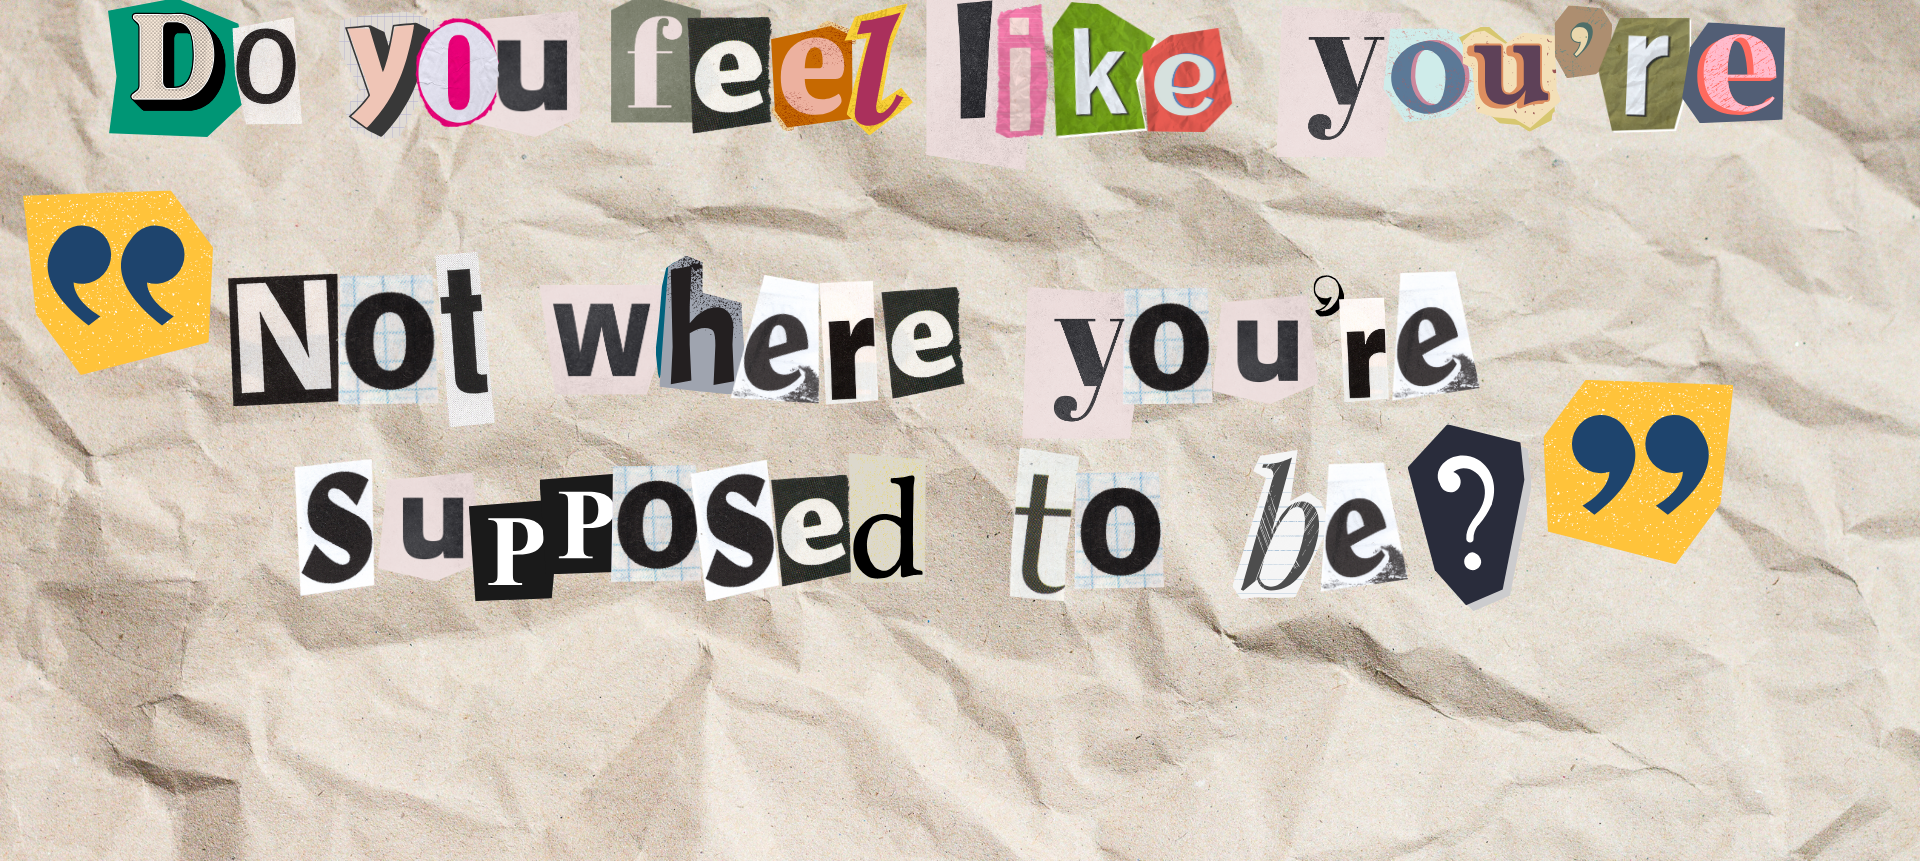 The image features a collage of assorted cutout letters forming the question &quot;Do you feel like you&#x27;re not where you&#x27;re supposed to be?&quot; on crumpled paper